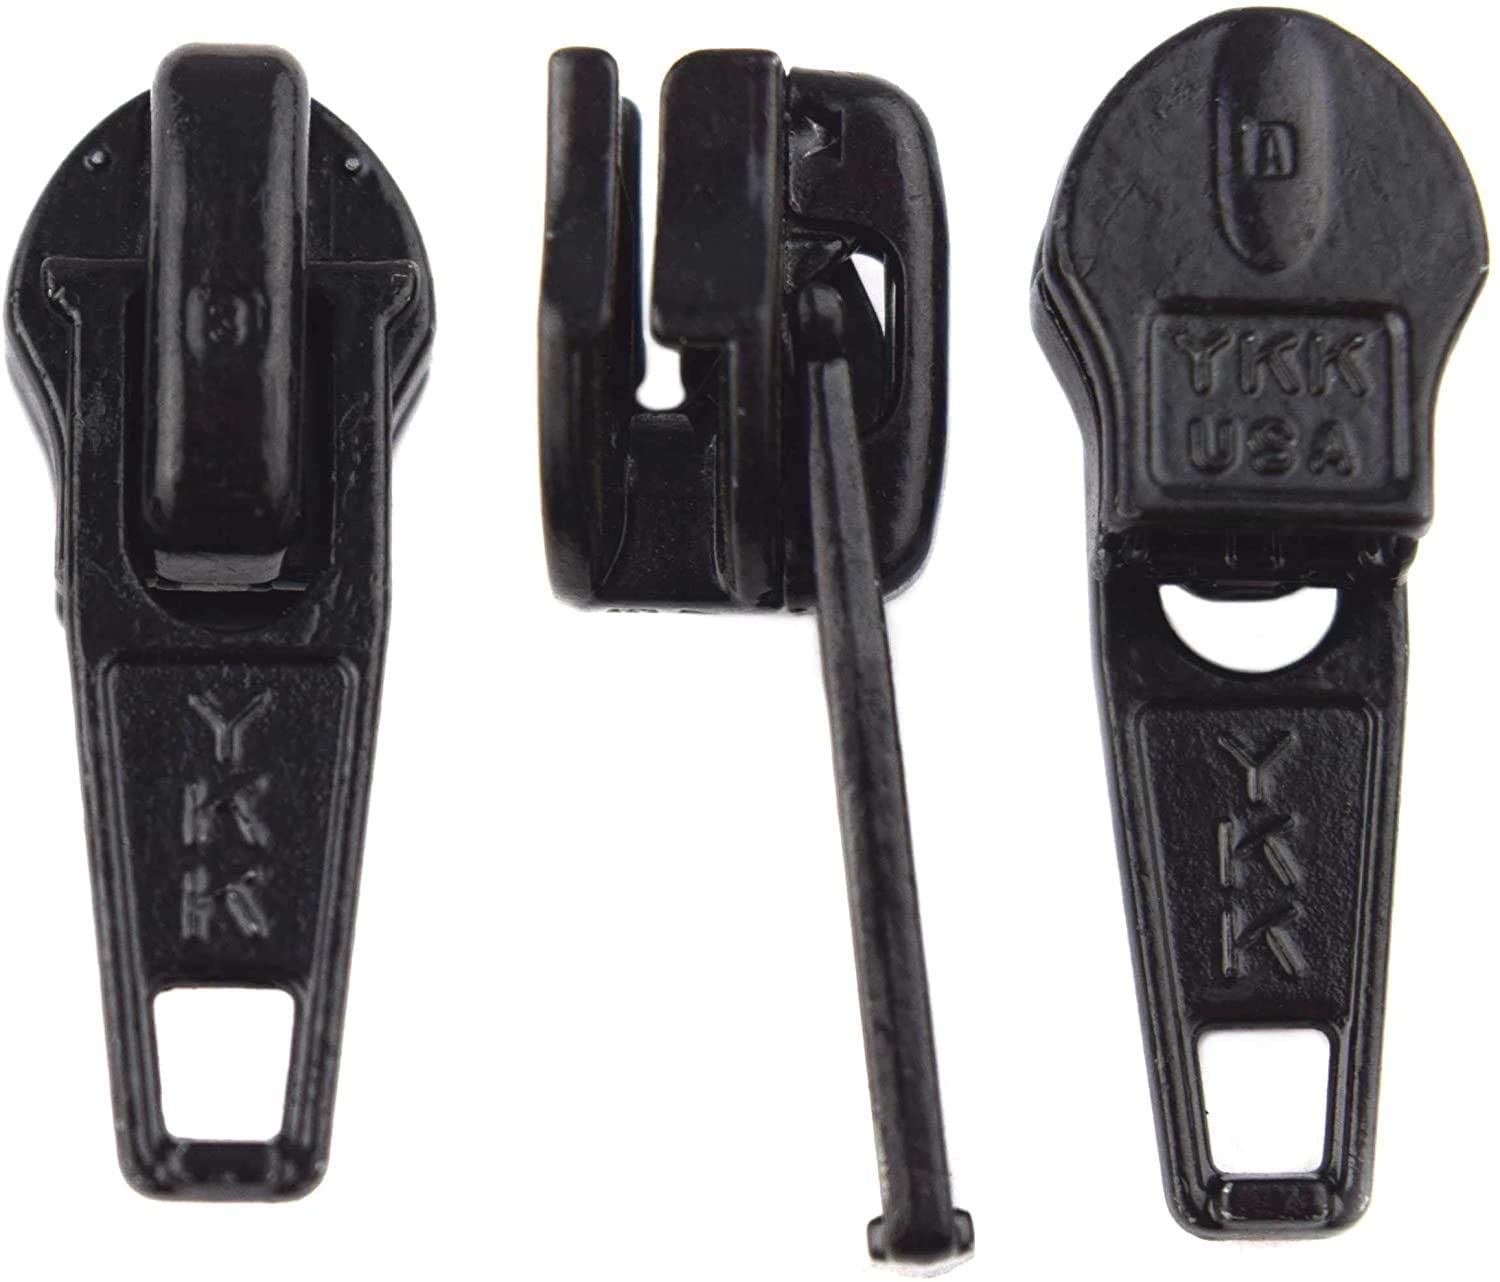 Zipper Repair Kit - #4.5 YKK Coil Automatic Lock Jacket Sliders - Color: Black - Choose Your Quantity - Made in The United States (10)